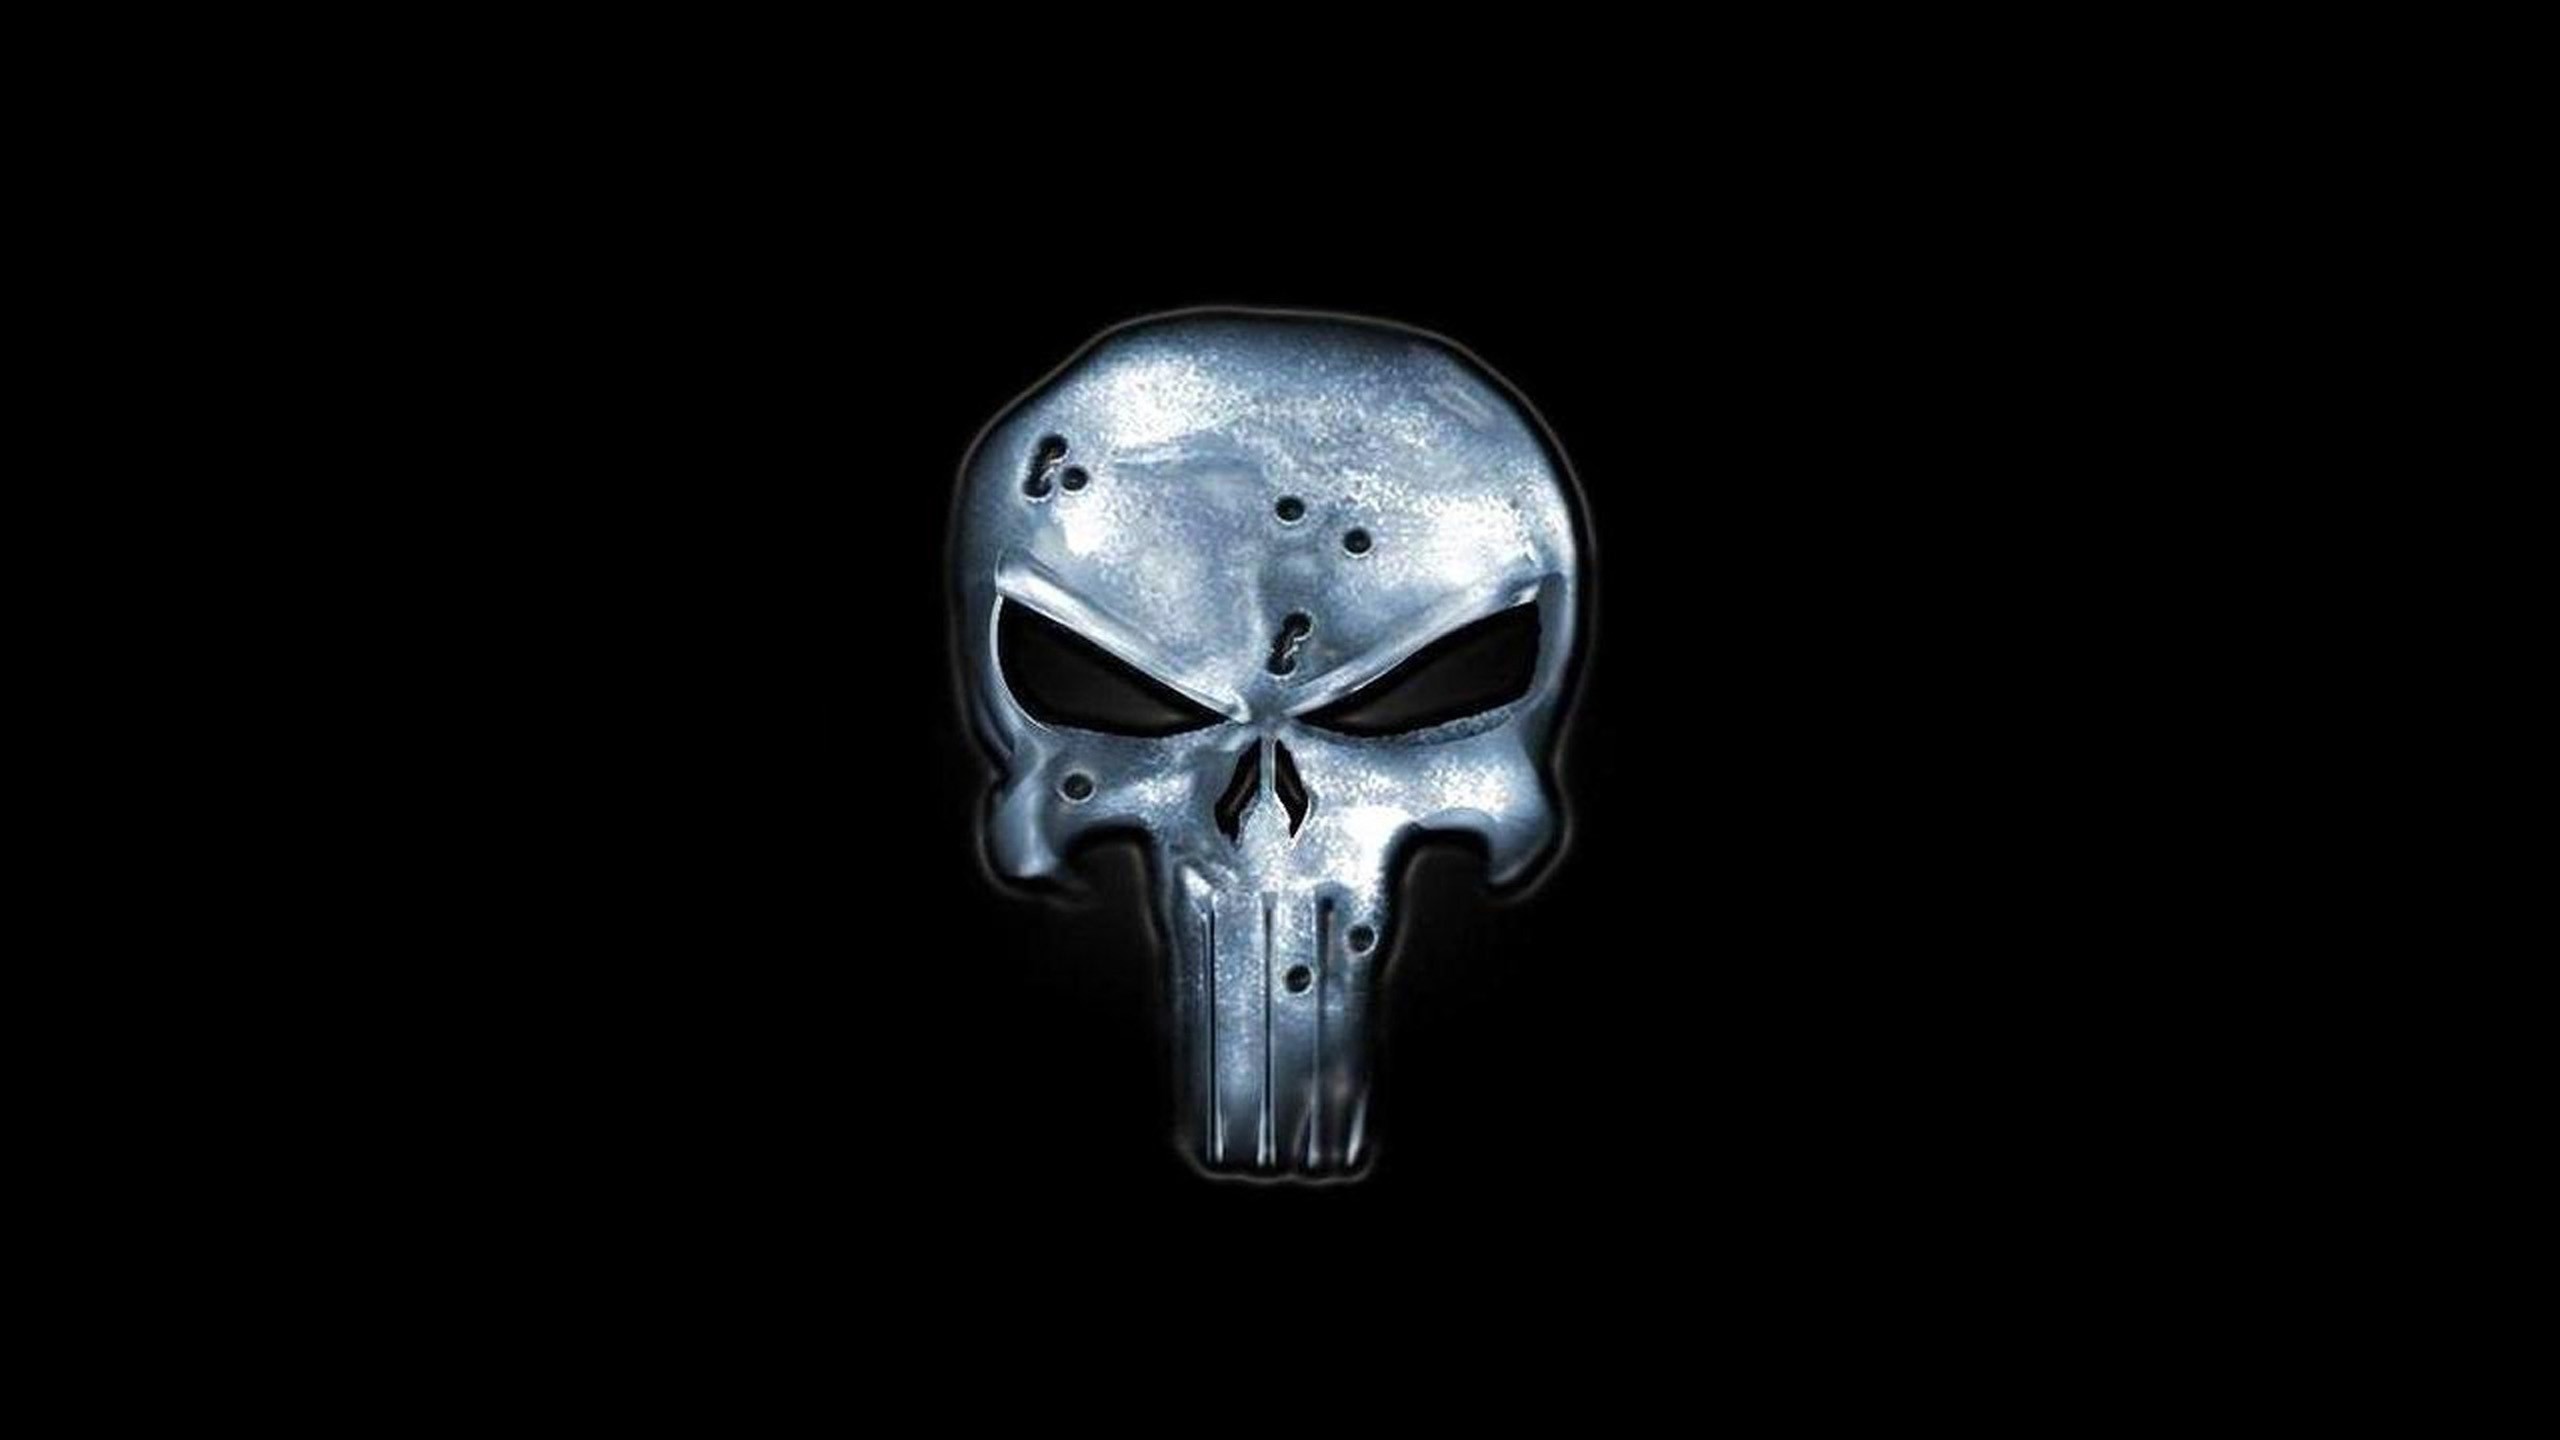 2560x1440  px High Resolution Wallpapers the punisher wallpaper by Stanton  Williams for : pocketfullofgrace.com